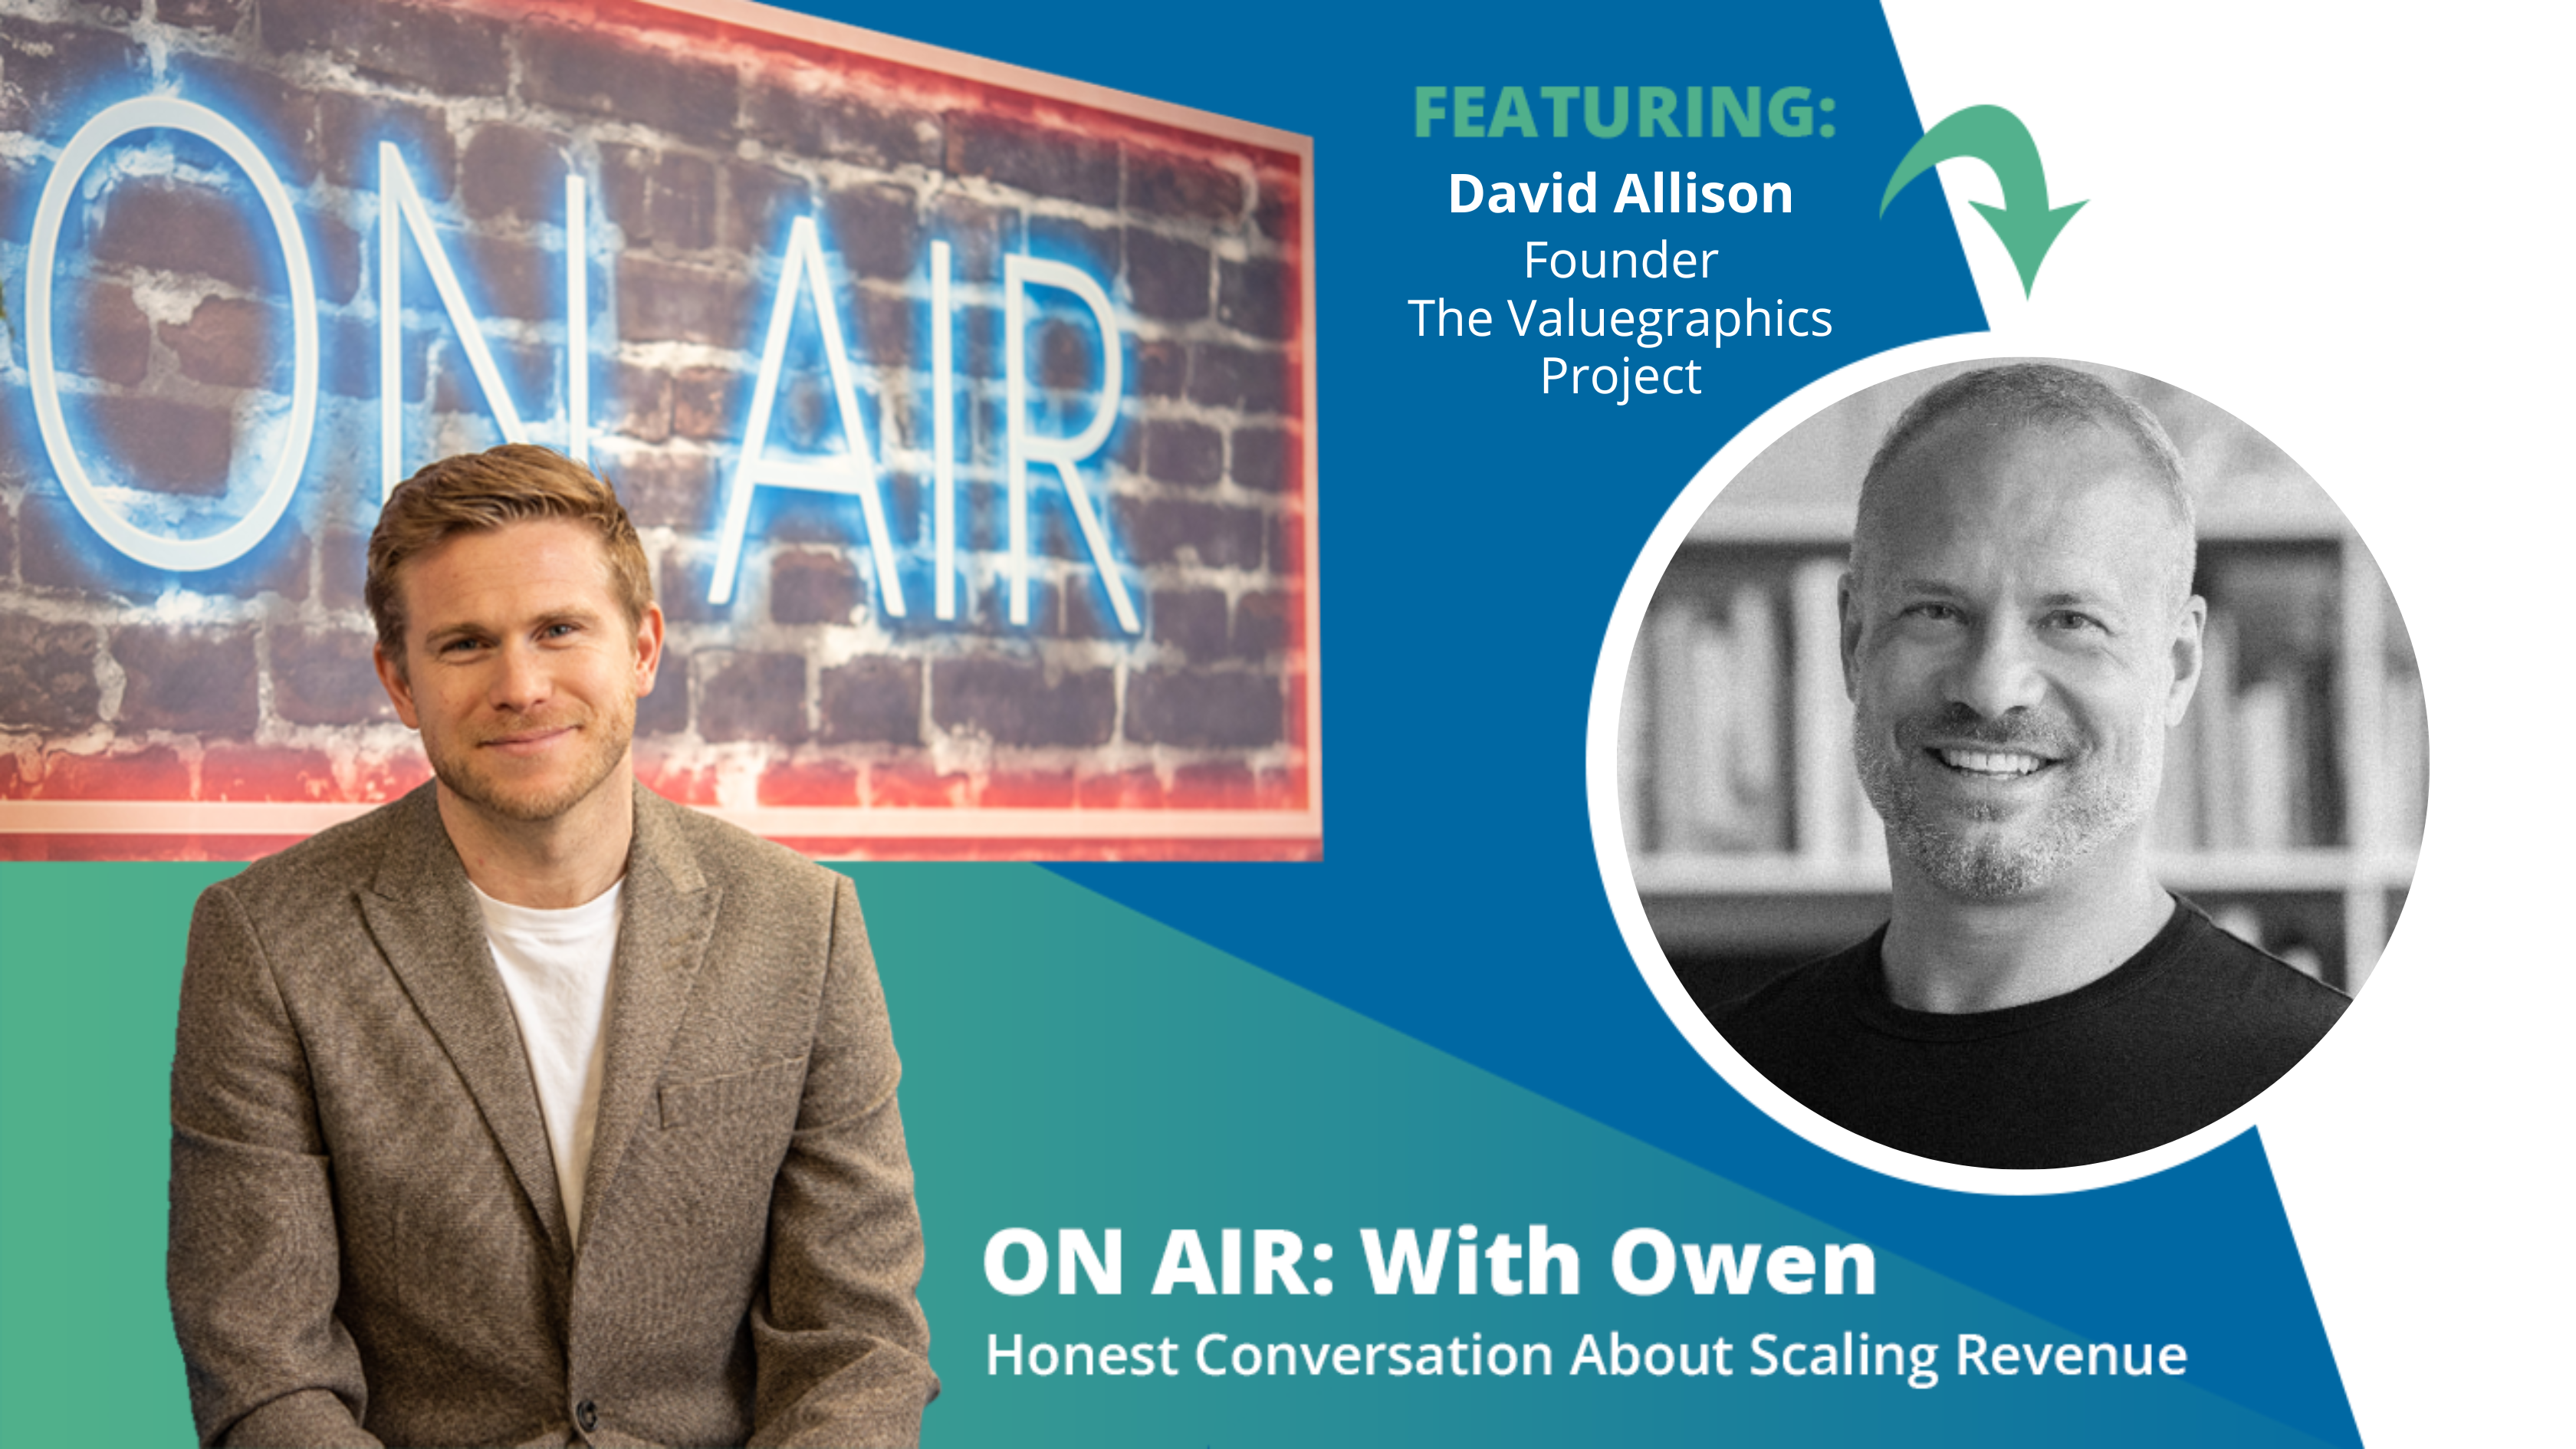 ON AIR: With Owen Episode 78 Featuring David Allison – Founder, The Valuegraphics Project